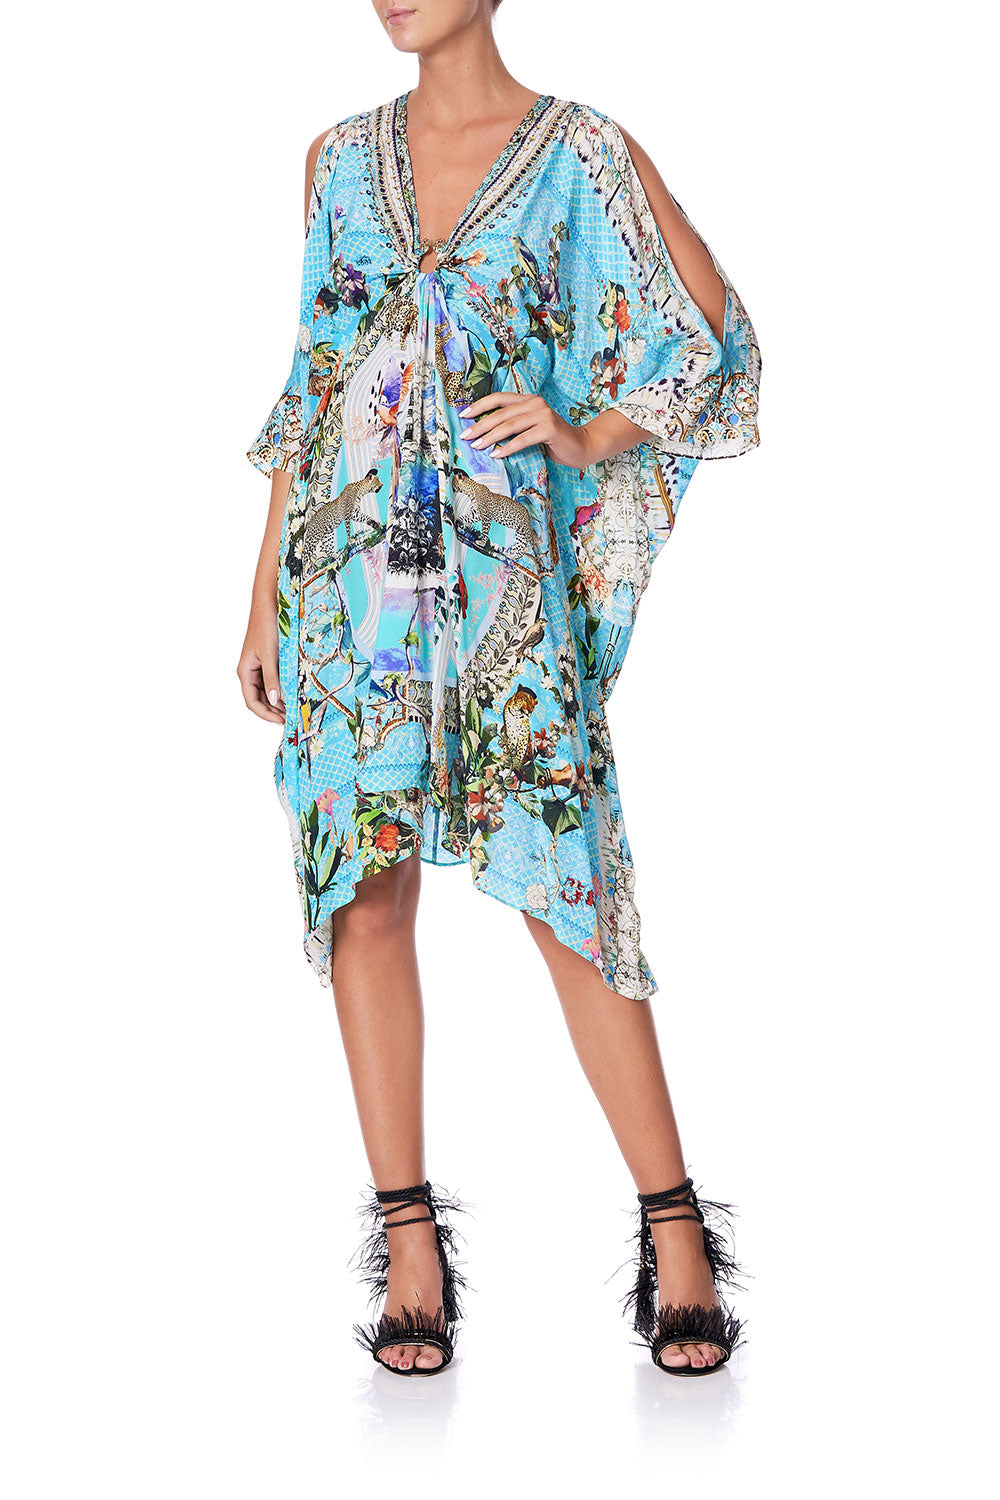 SHORT KAFTAN WITH HARDWARE GIRL FROM ST TROPEZ